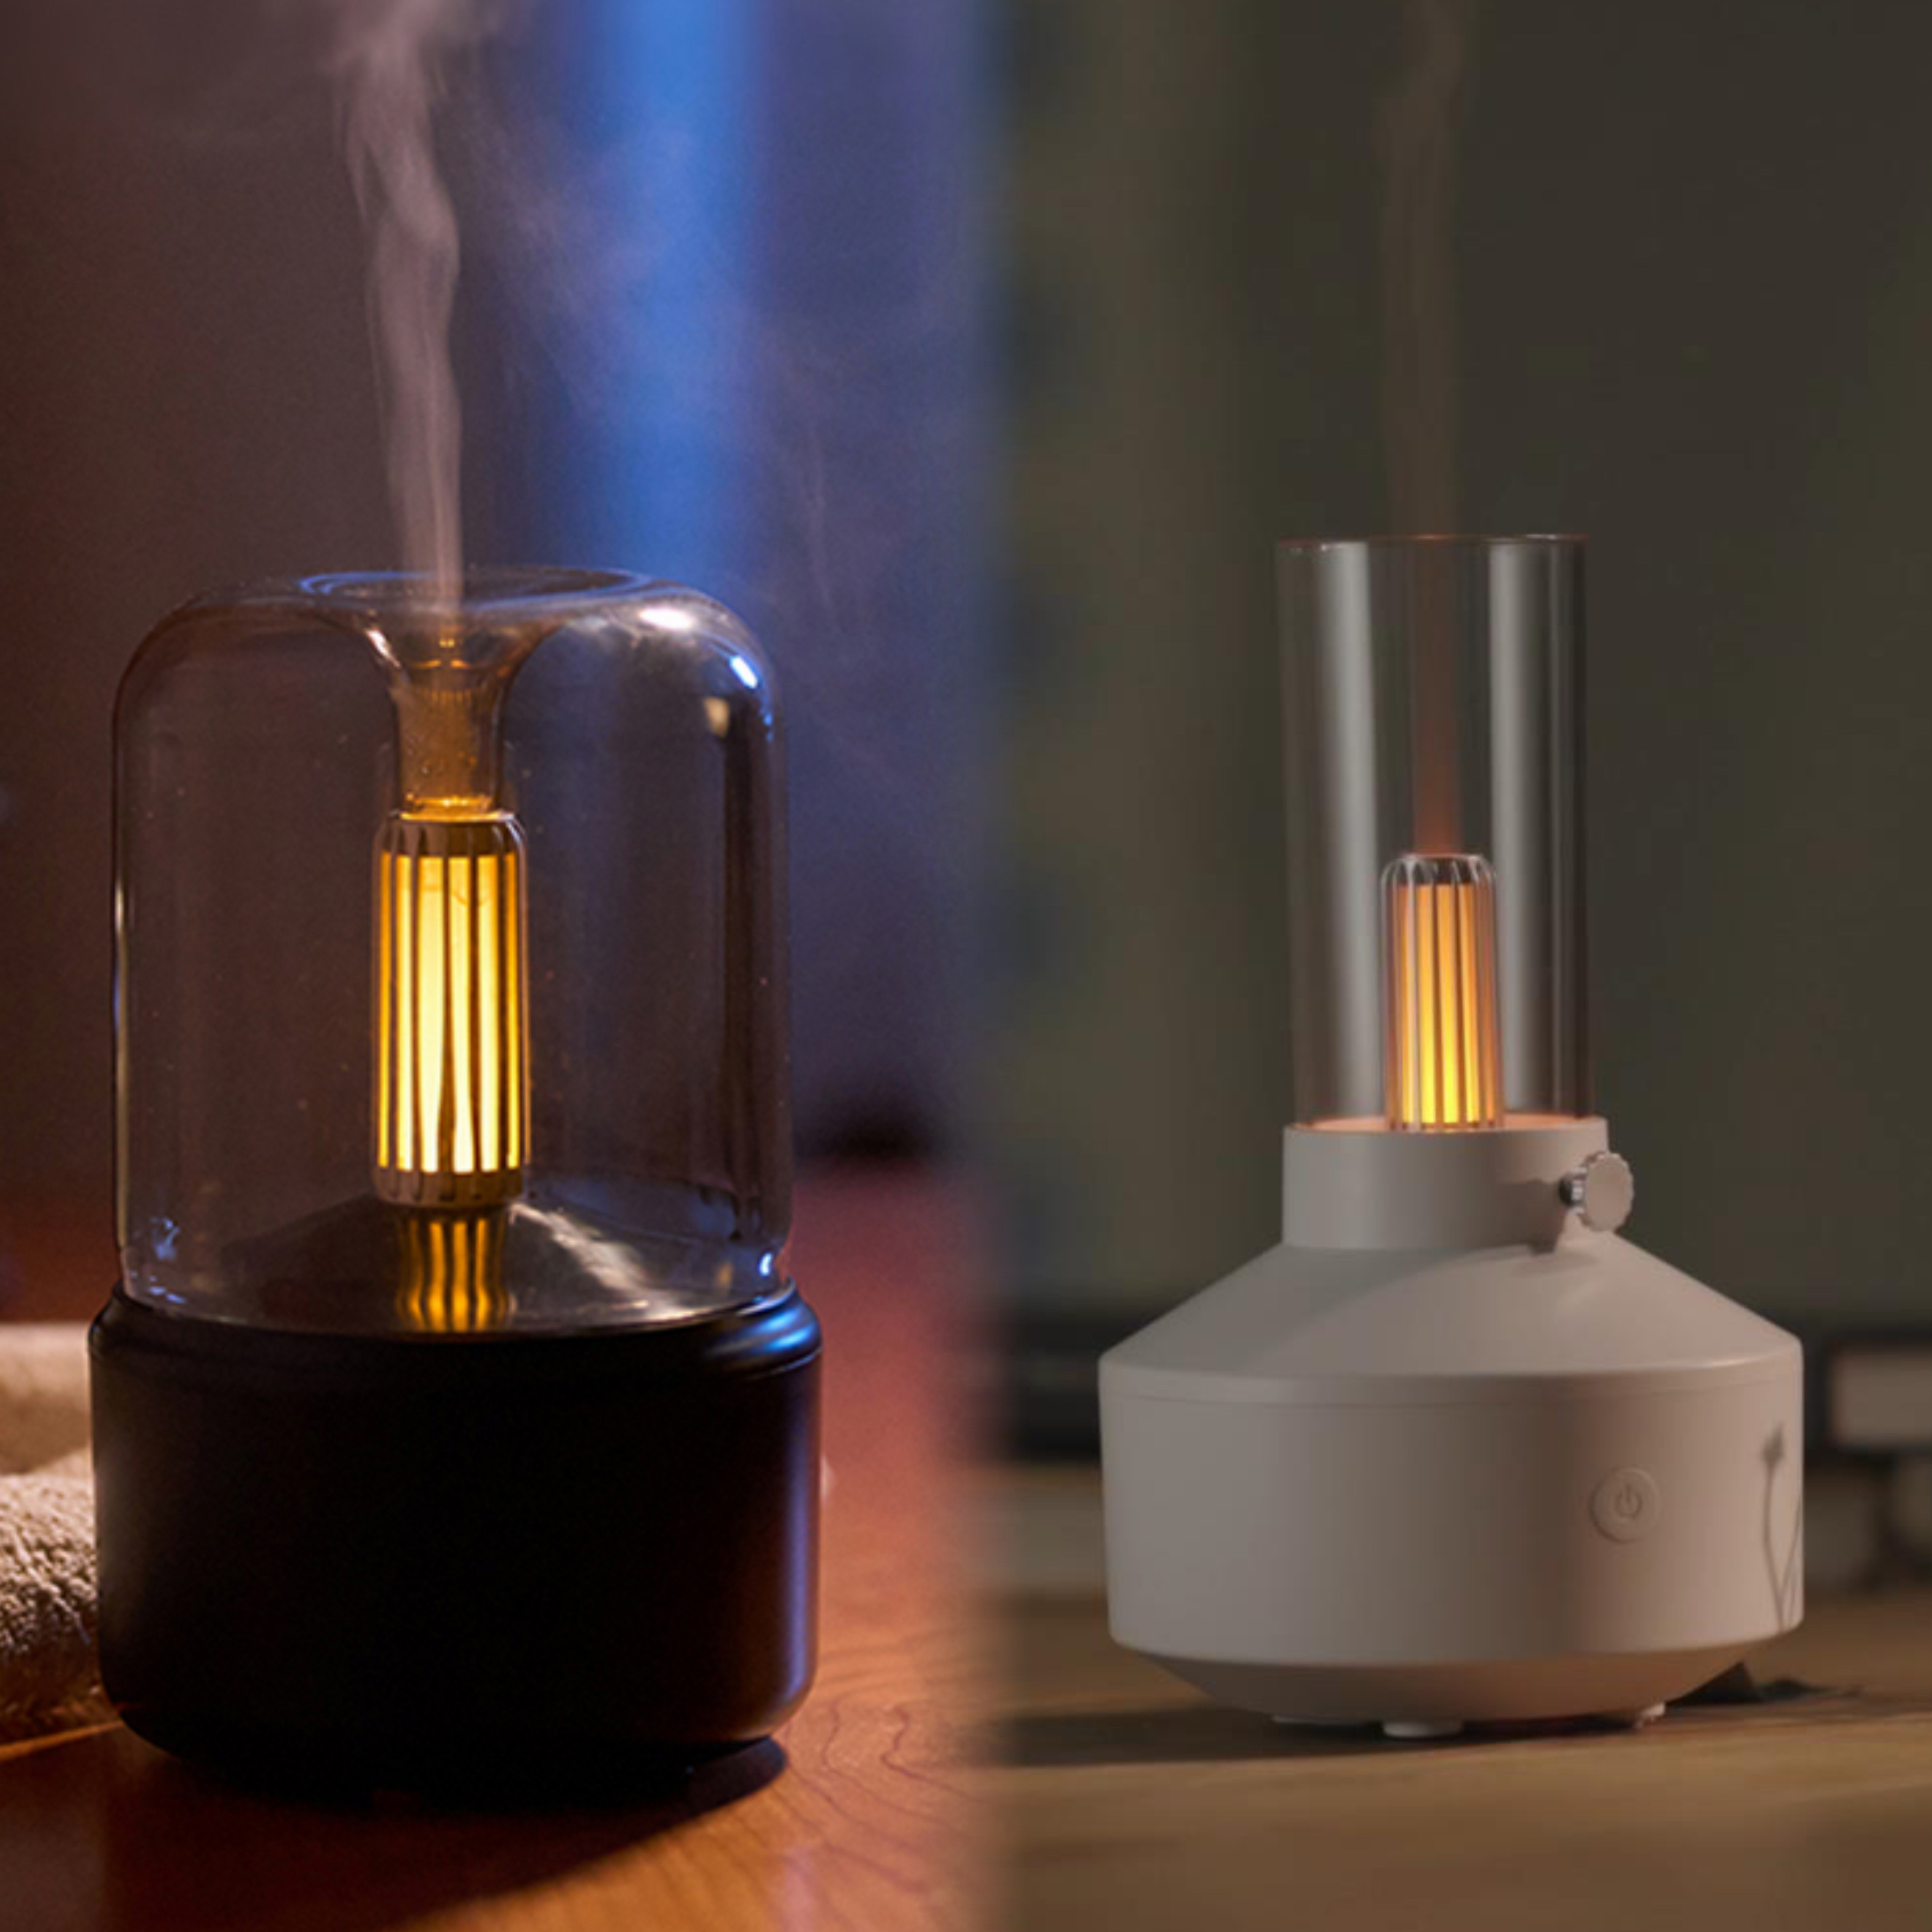 Candlelight Aroma Diffusers Can Also Bring You A Romantic Candlelight Dinner